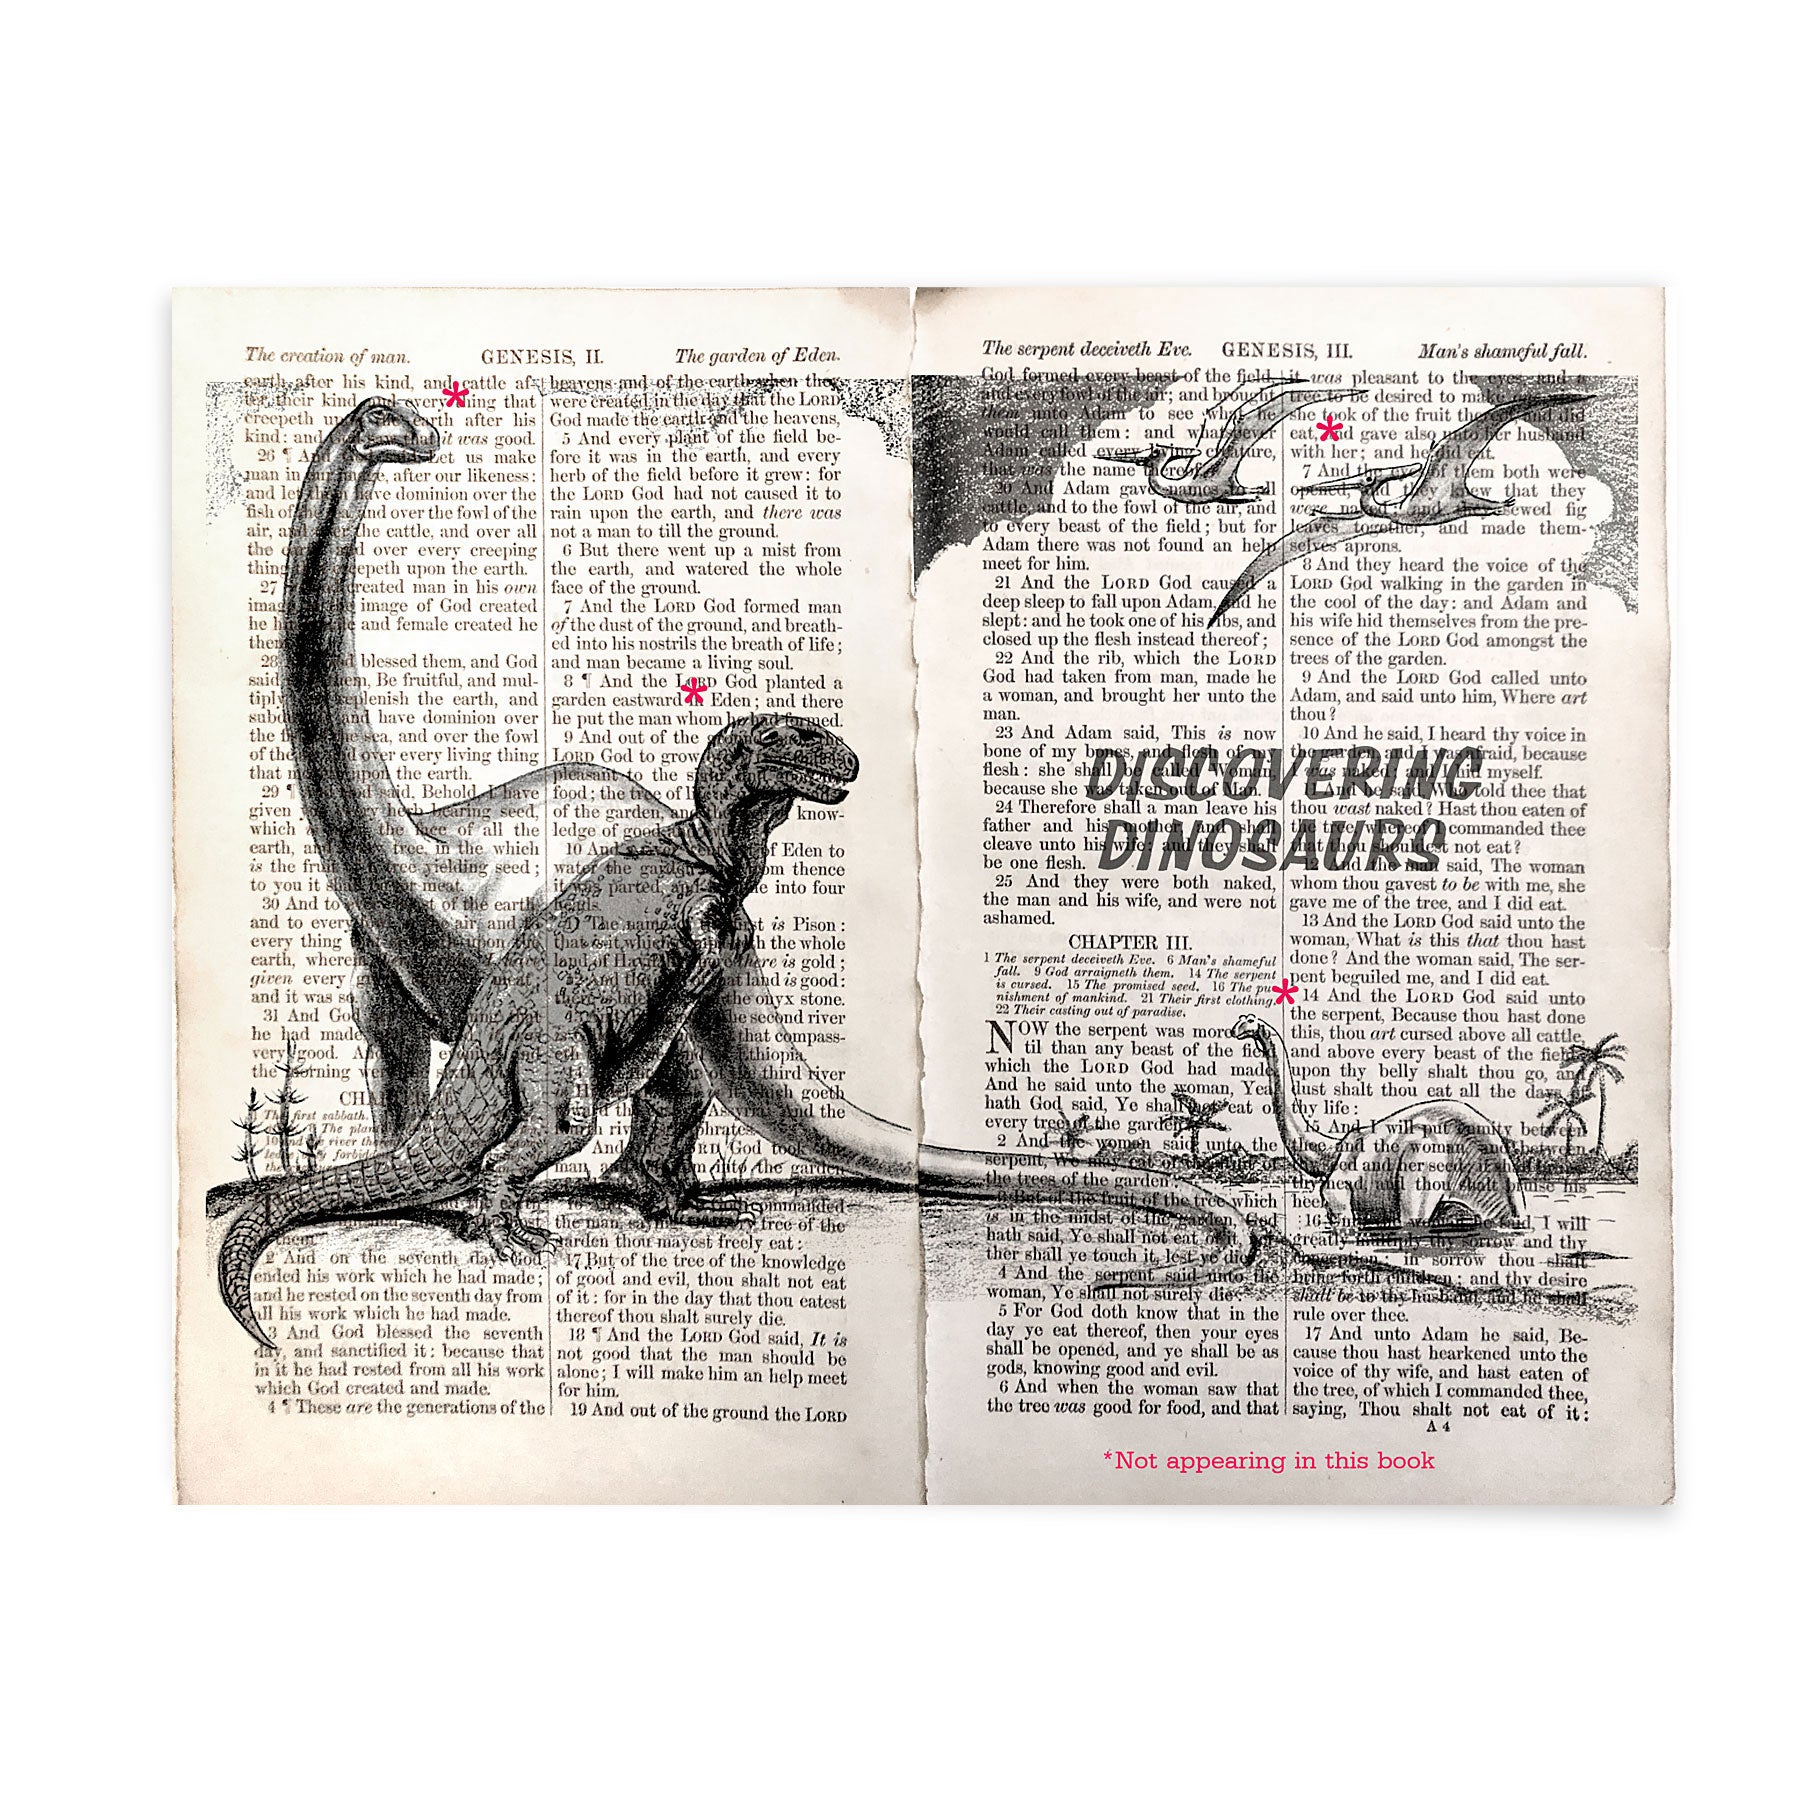 Dinosaurs screen printed over pages from the Bible